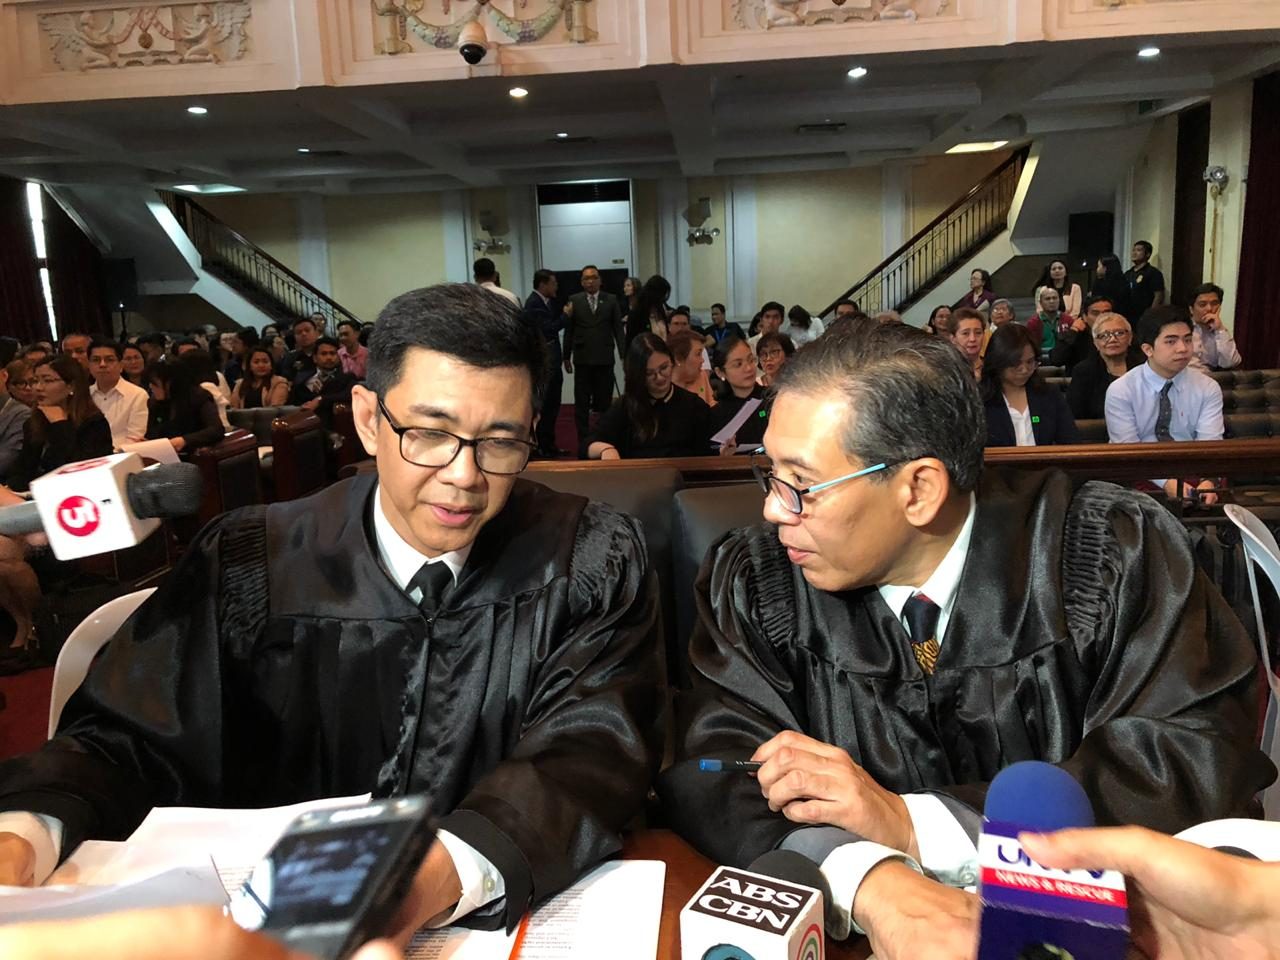 Supreme Court spares IBP, Diokno in West PH Sea case mess